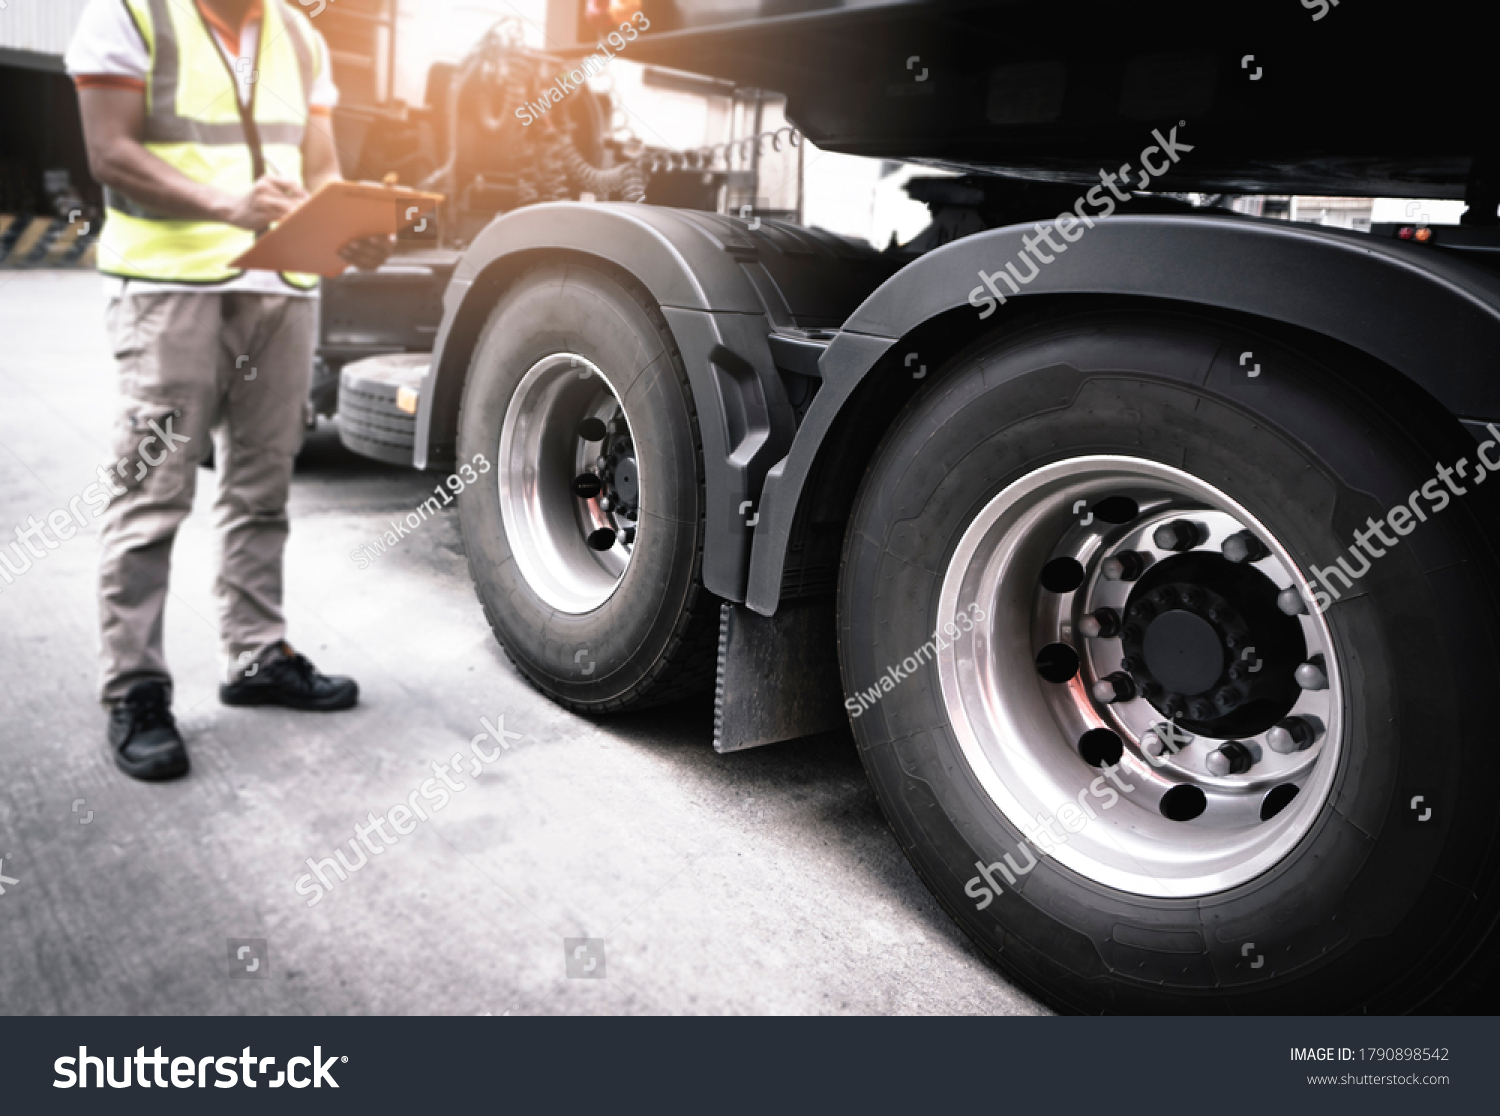 Semi truck, Maintenance and Vehicle inspection.  A truck mechanic driver holding clipboard, his safety checking a truck wheels and tires.